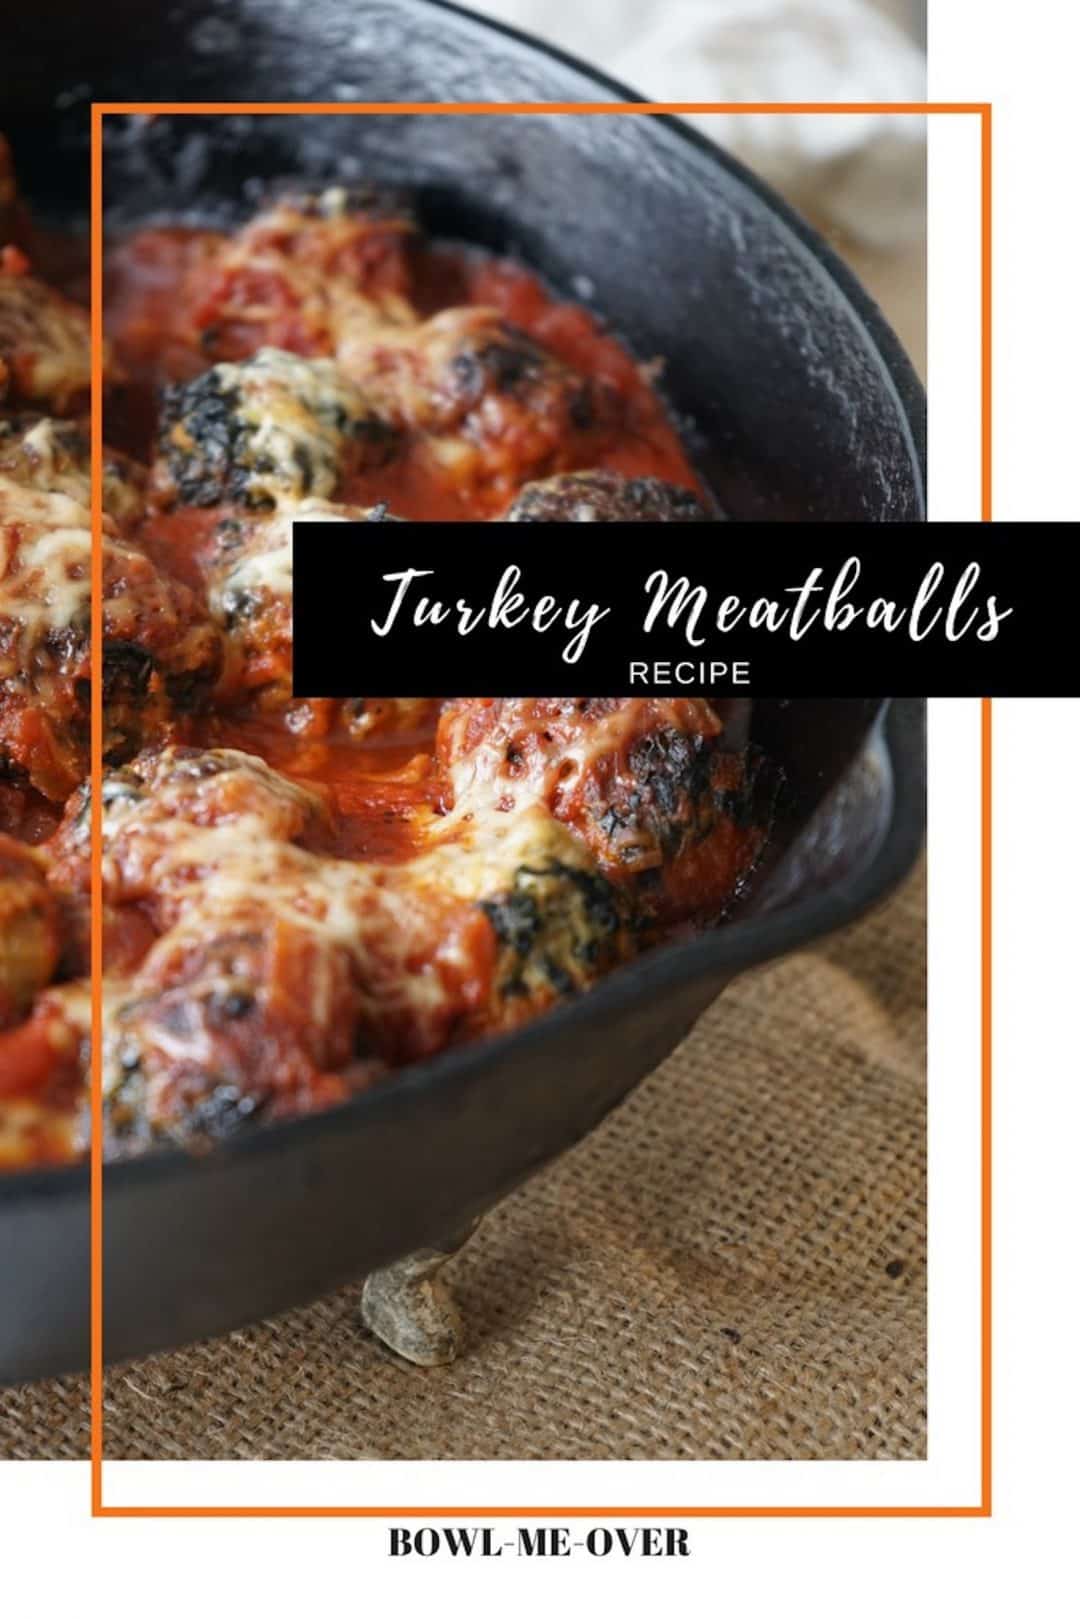 Turkey meatballs in sauce with a text overlay.